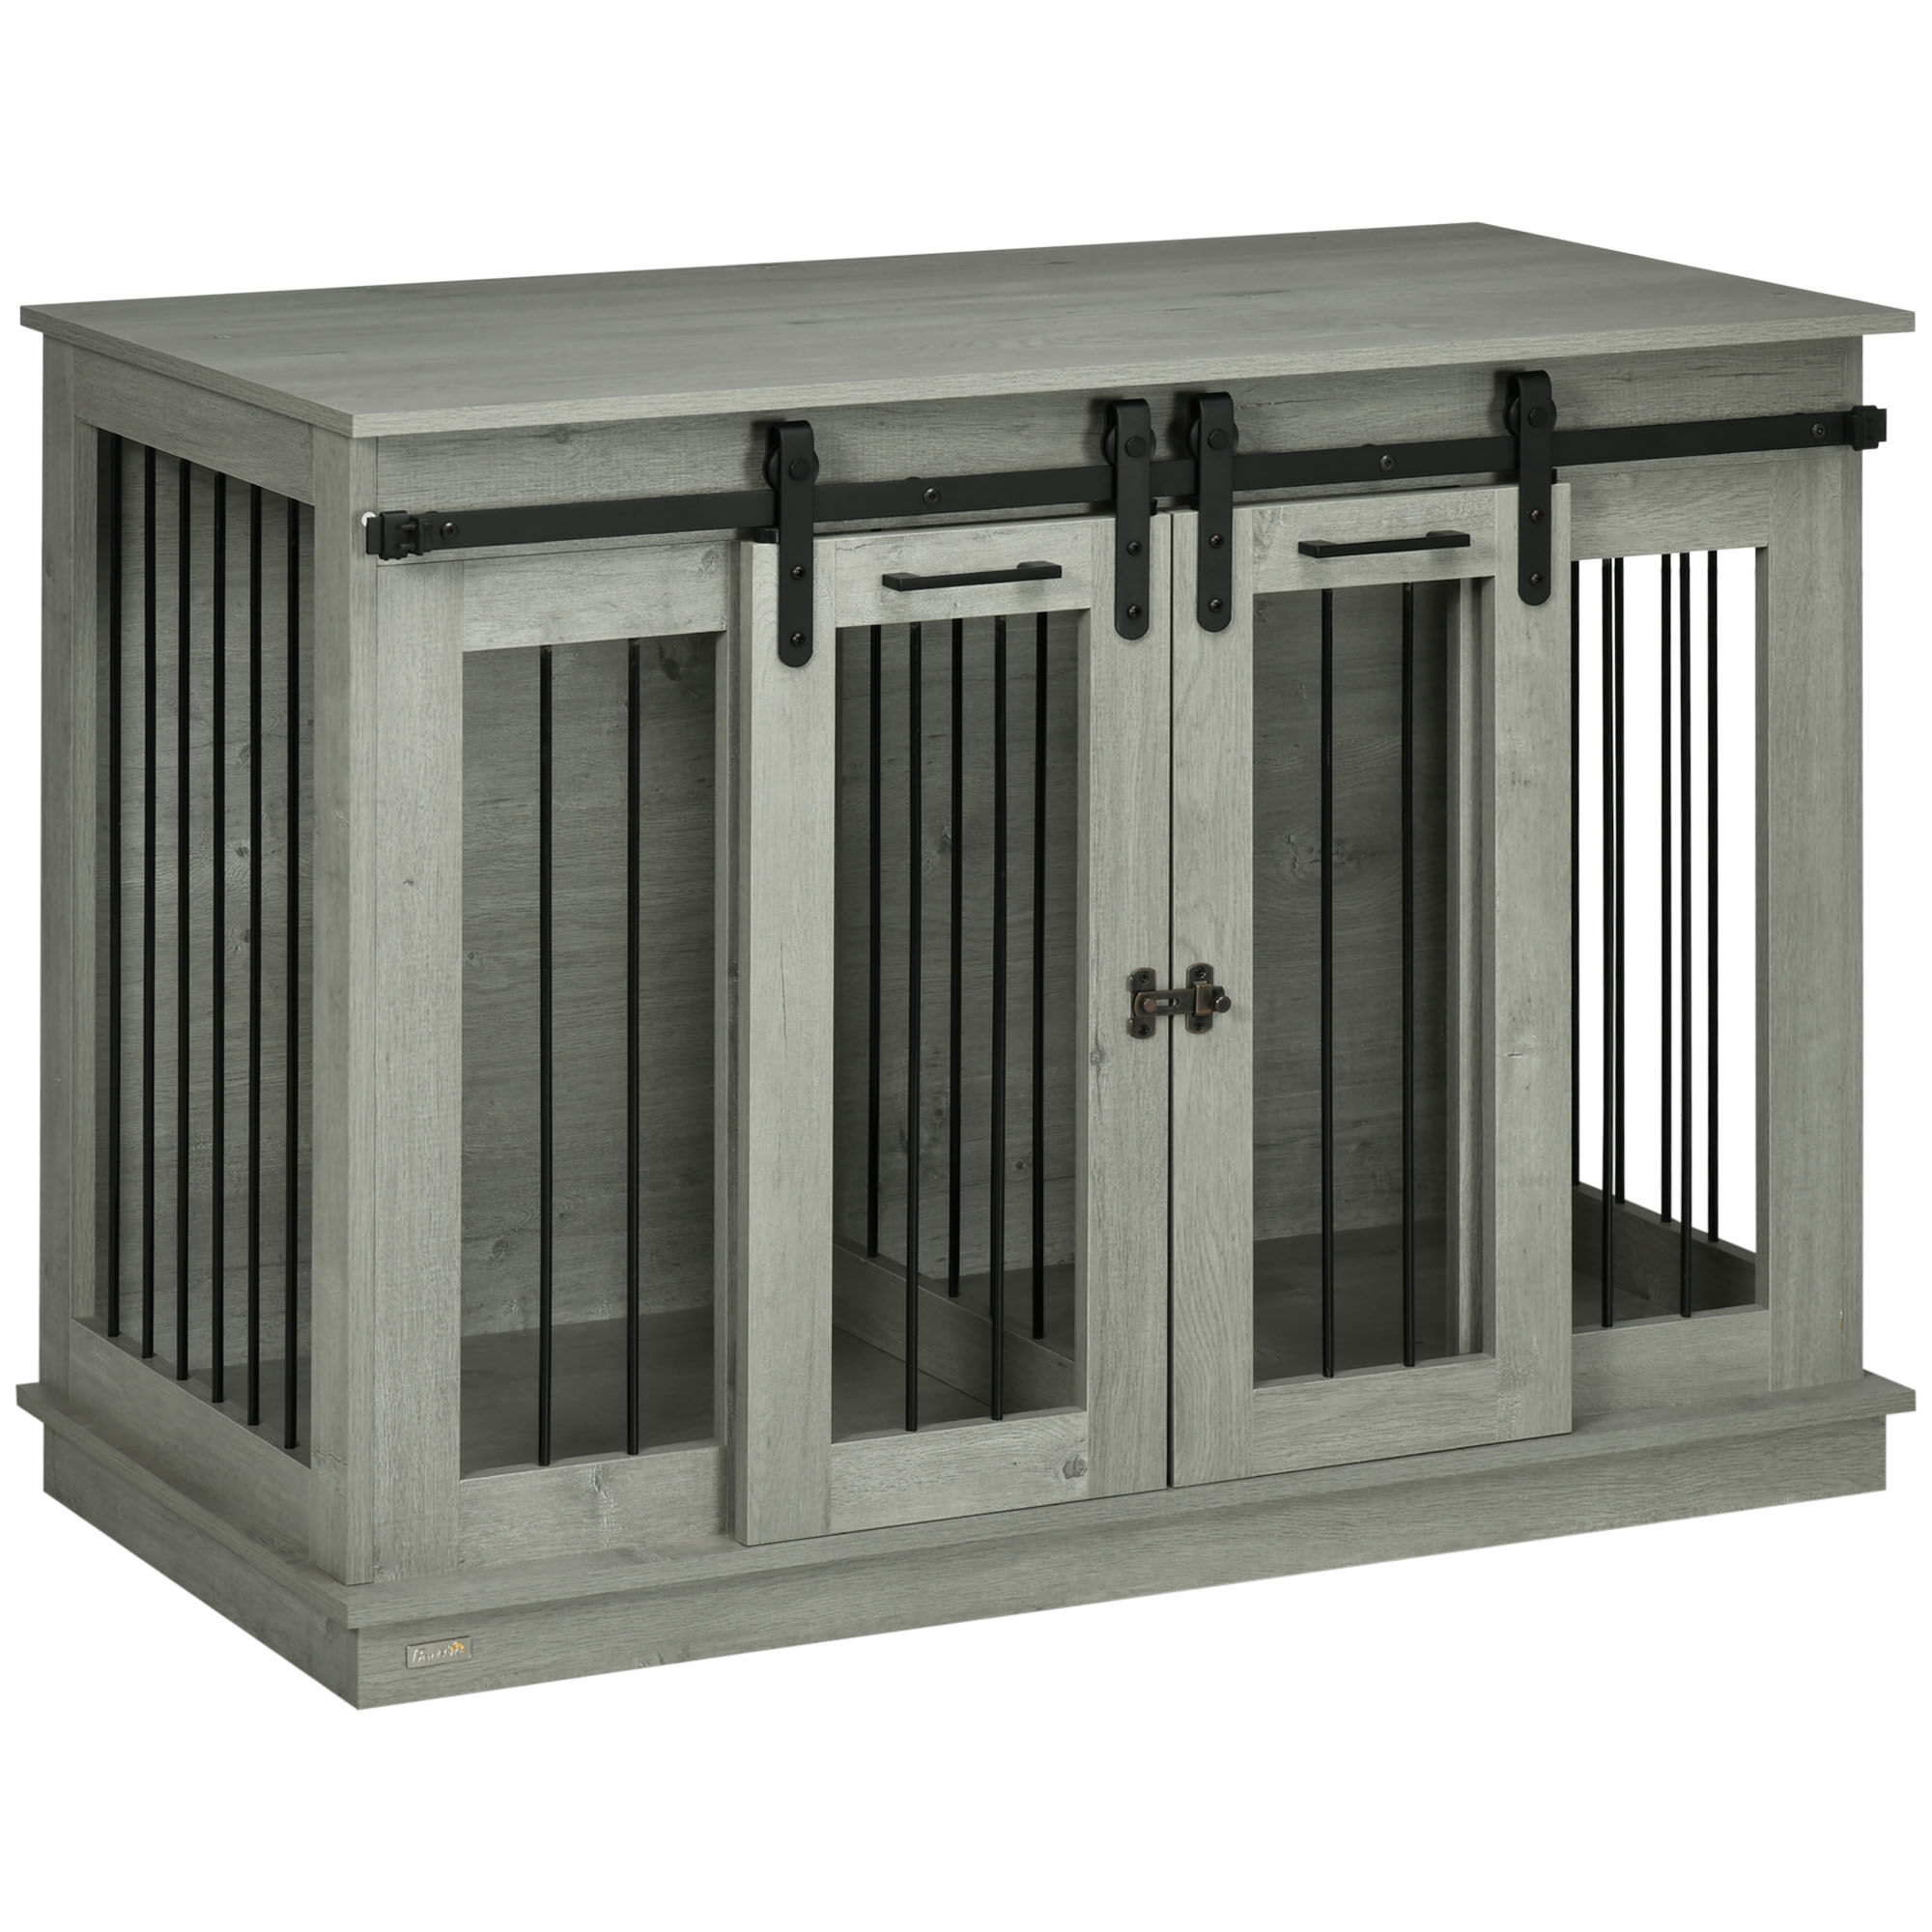 PawHut 47.5" Dog Crate, Dog Cage End Table with Divider Panel, Dog Crate Furniture for Large Dog and 2 Small Dogs, Gray